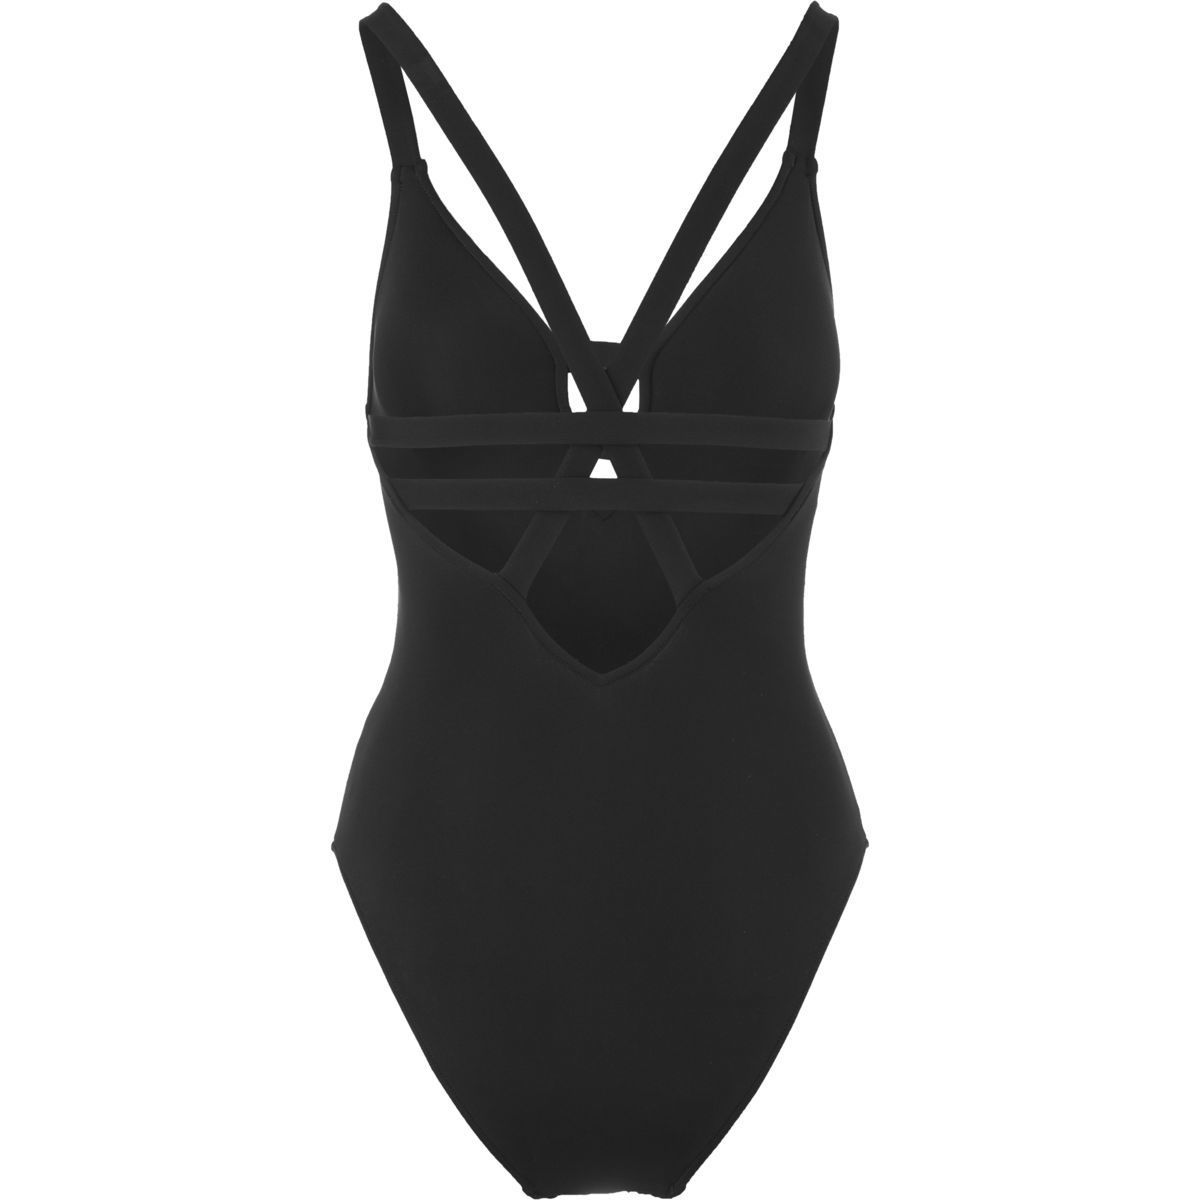 Seafolly Active Deep V Maillot One-Piece Swimsuit - Women's Black 10 | eBay